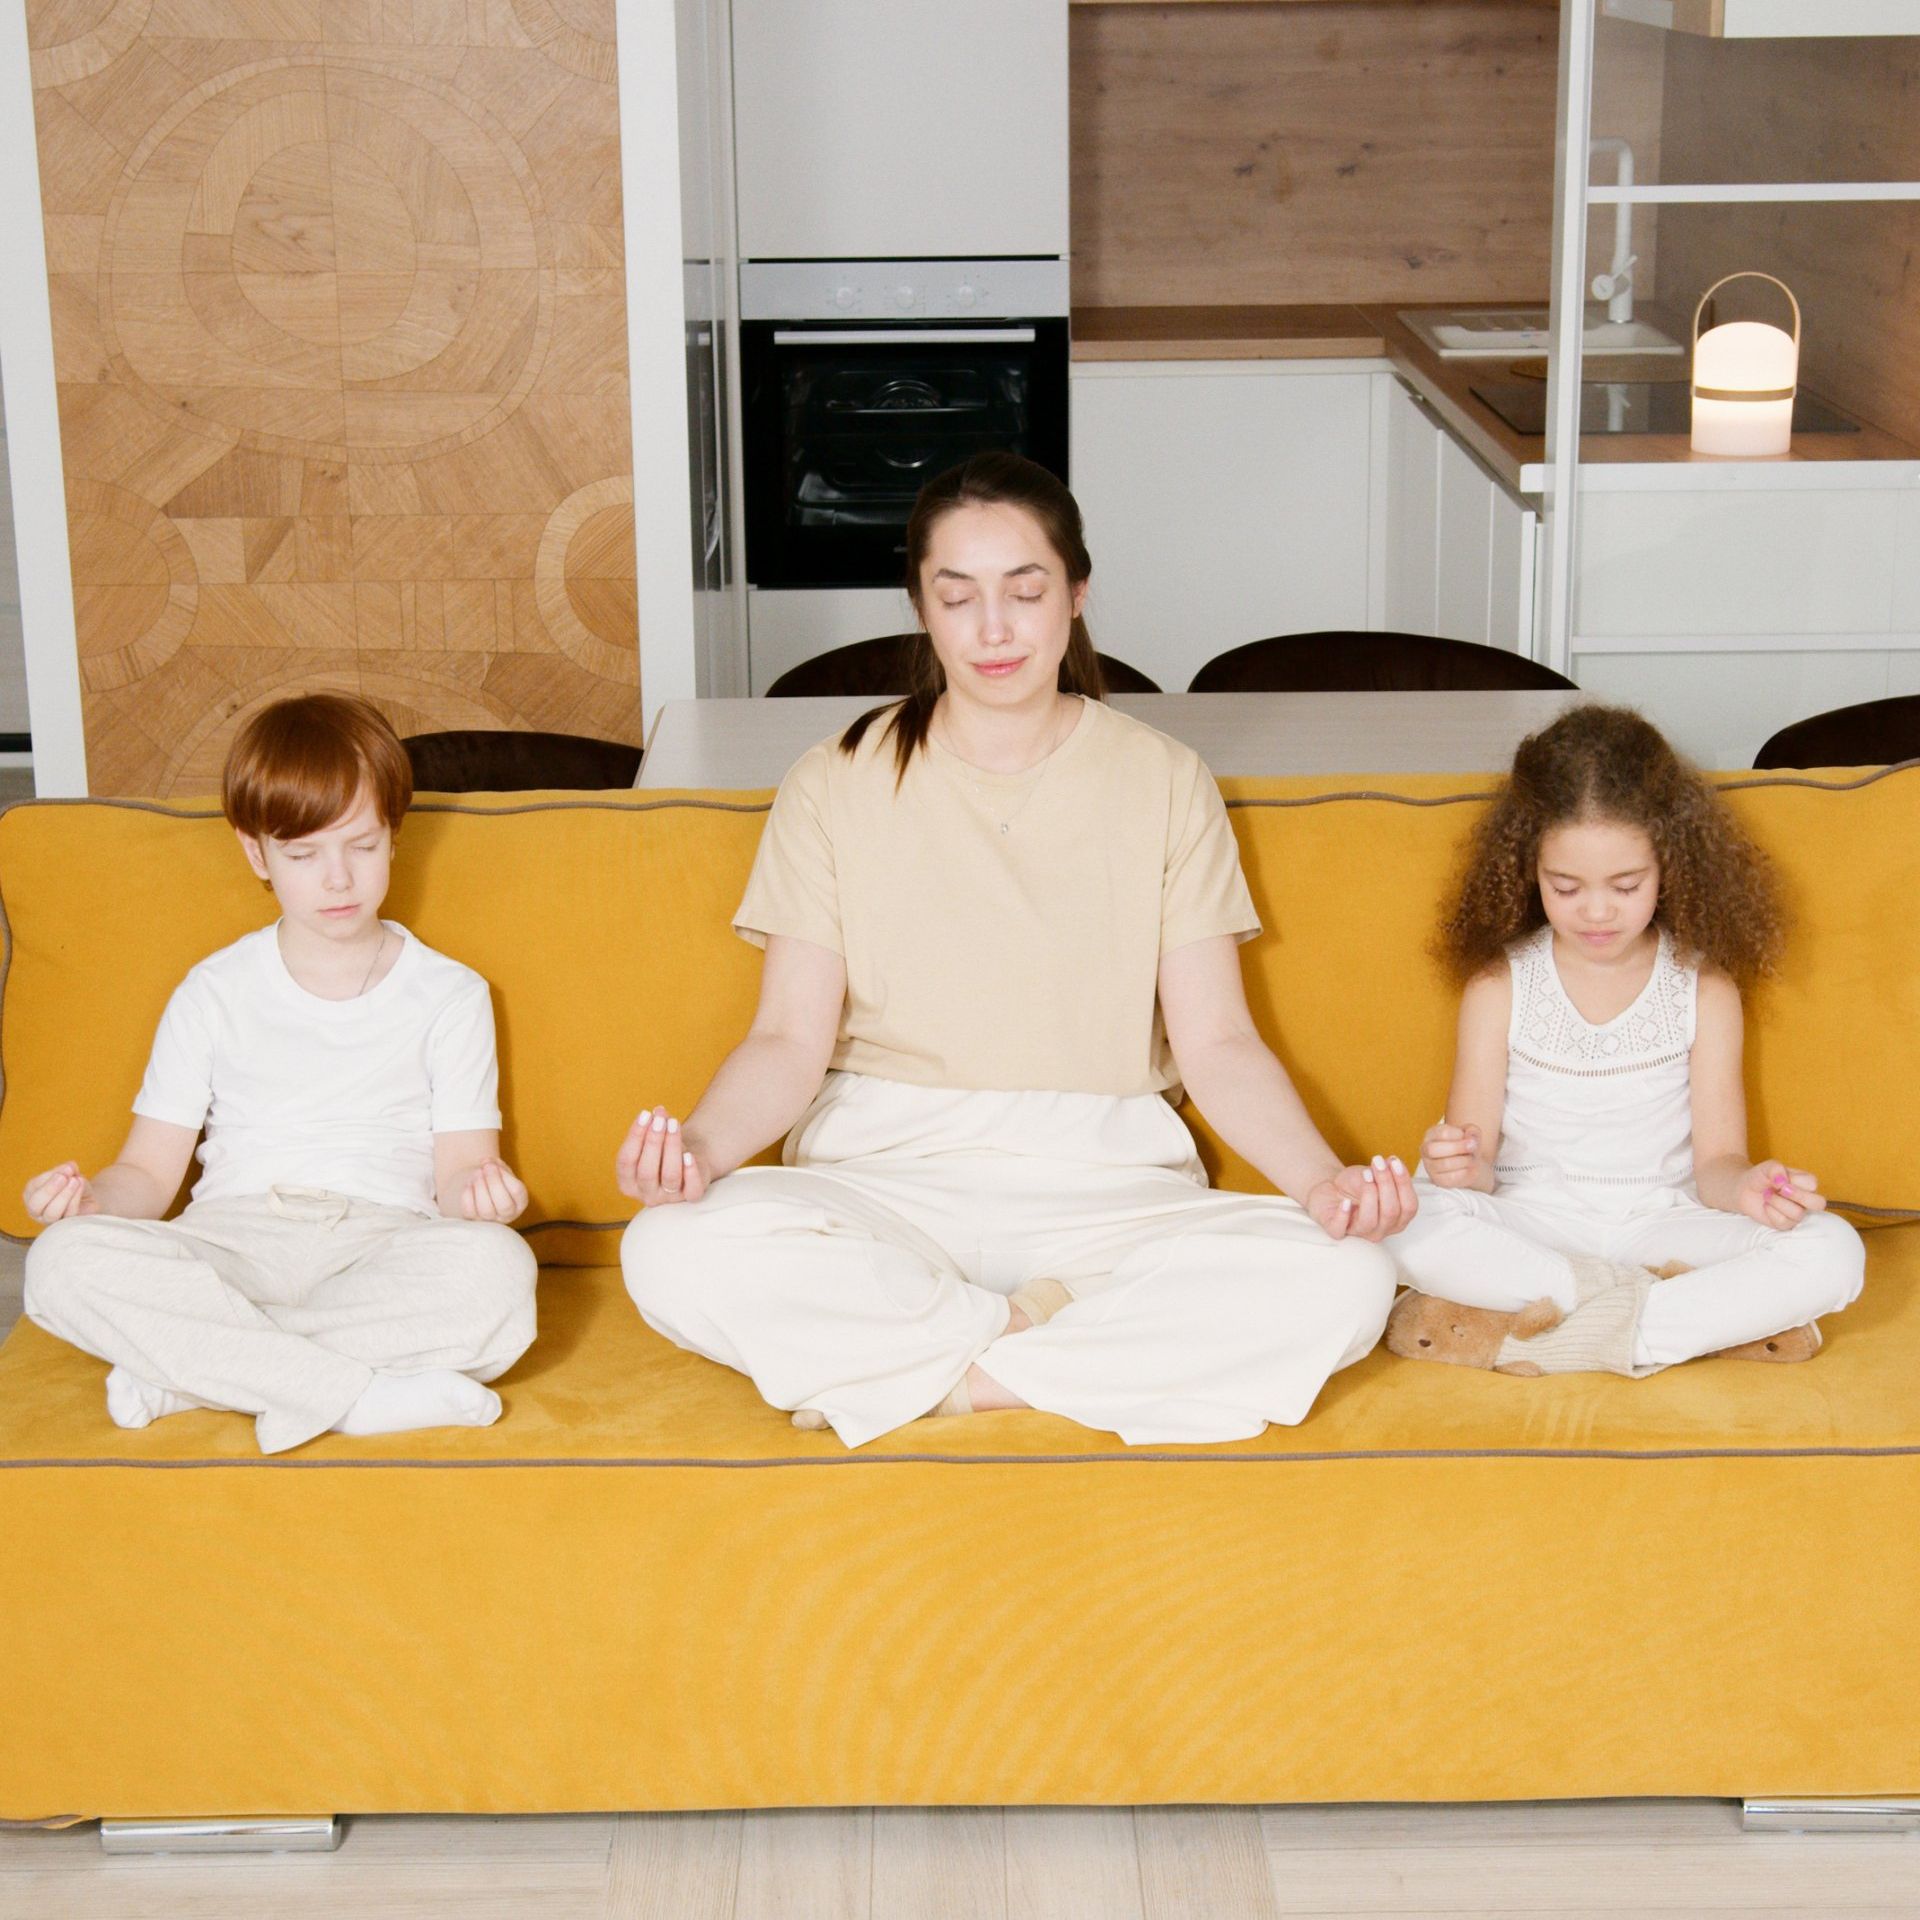 Image of mother and children meditating on their living room sofa.